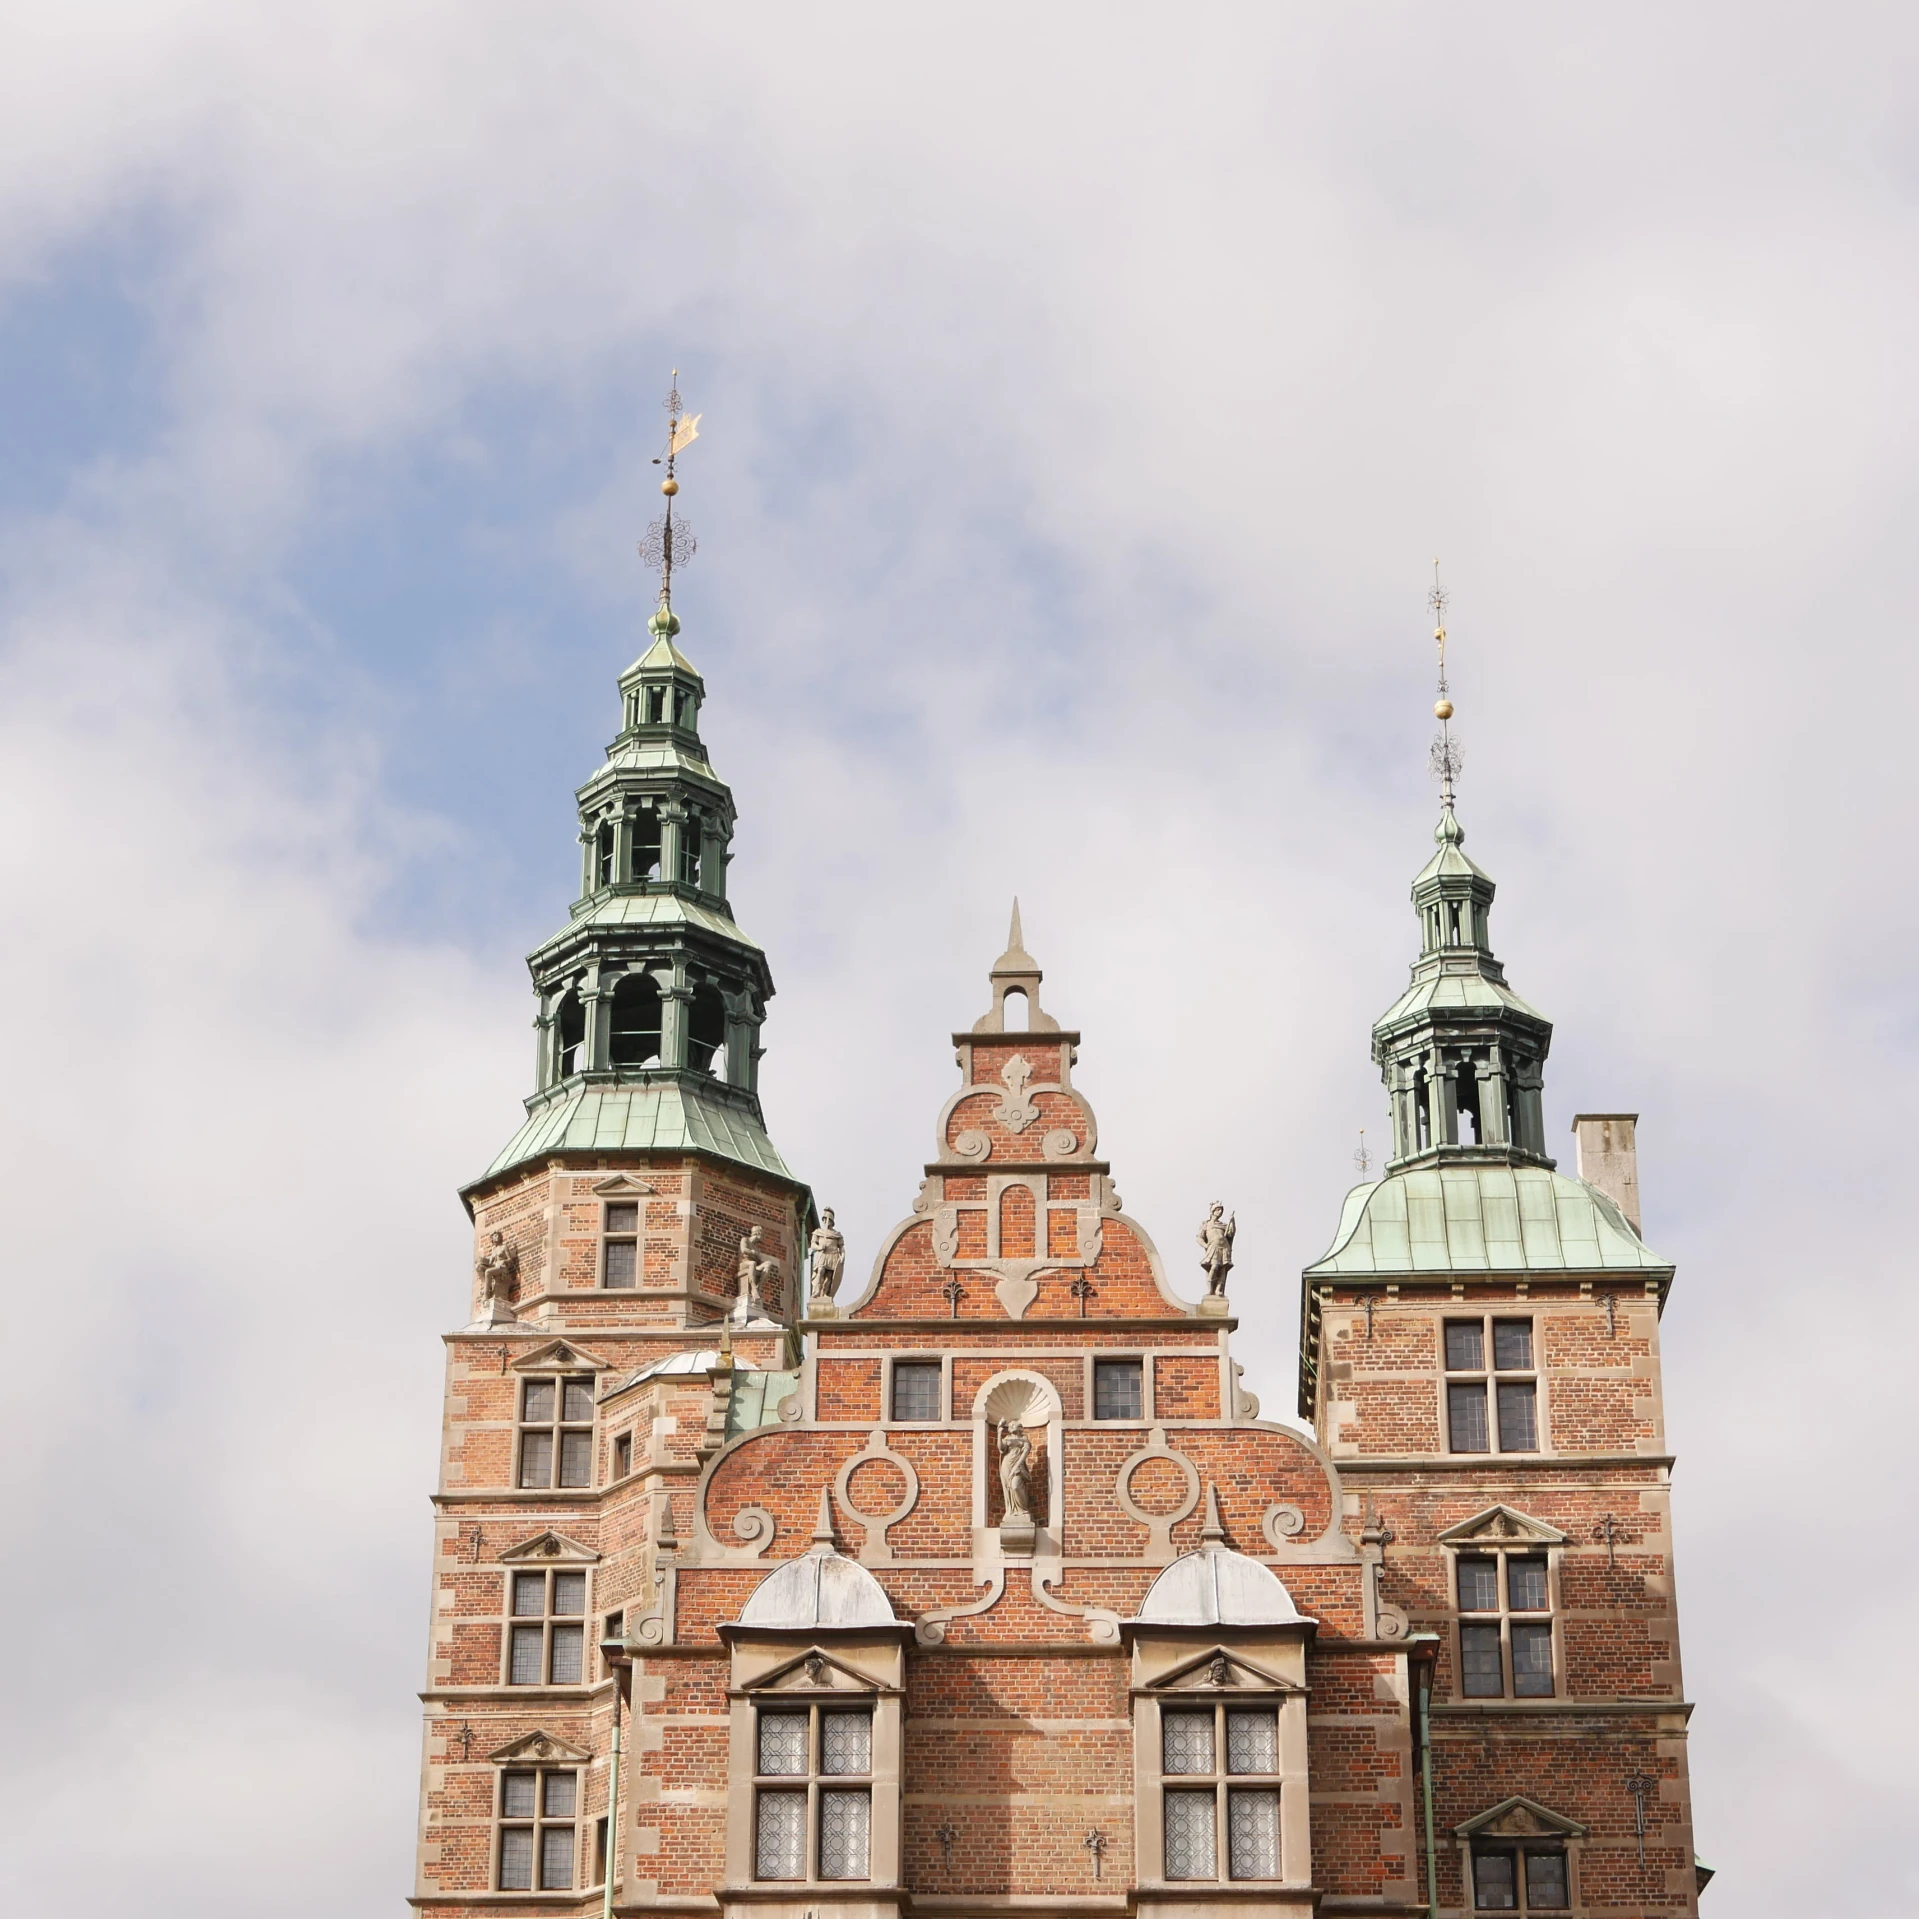 a large building with a clock on top of it, by Jan Tengnagel, pexels contest winner, baroque, two organic looking towers, denmark, 15081959 21121991 01012000 4k, neptune